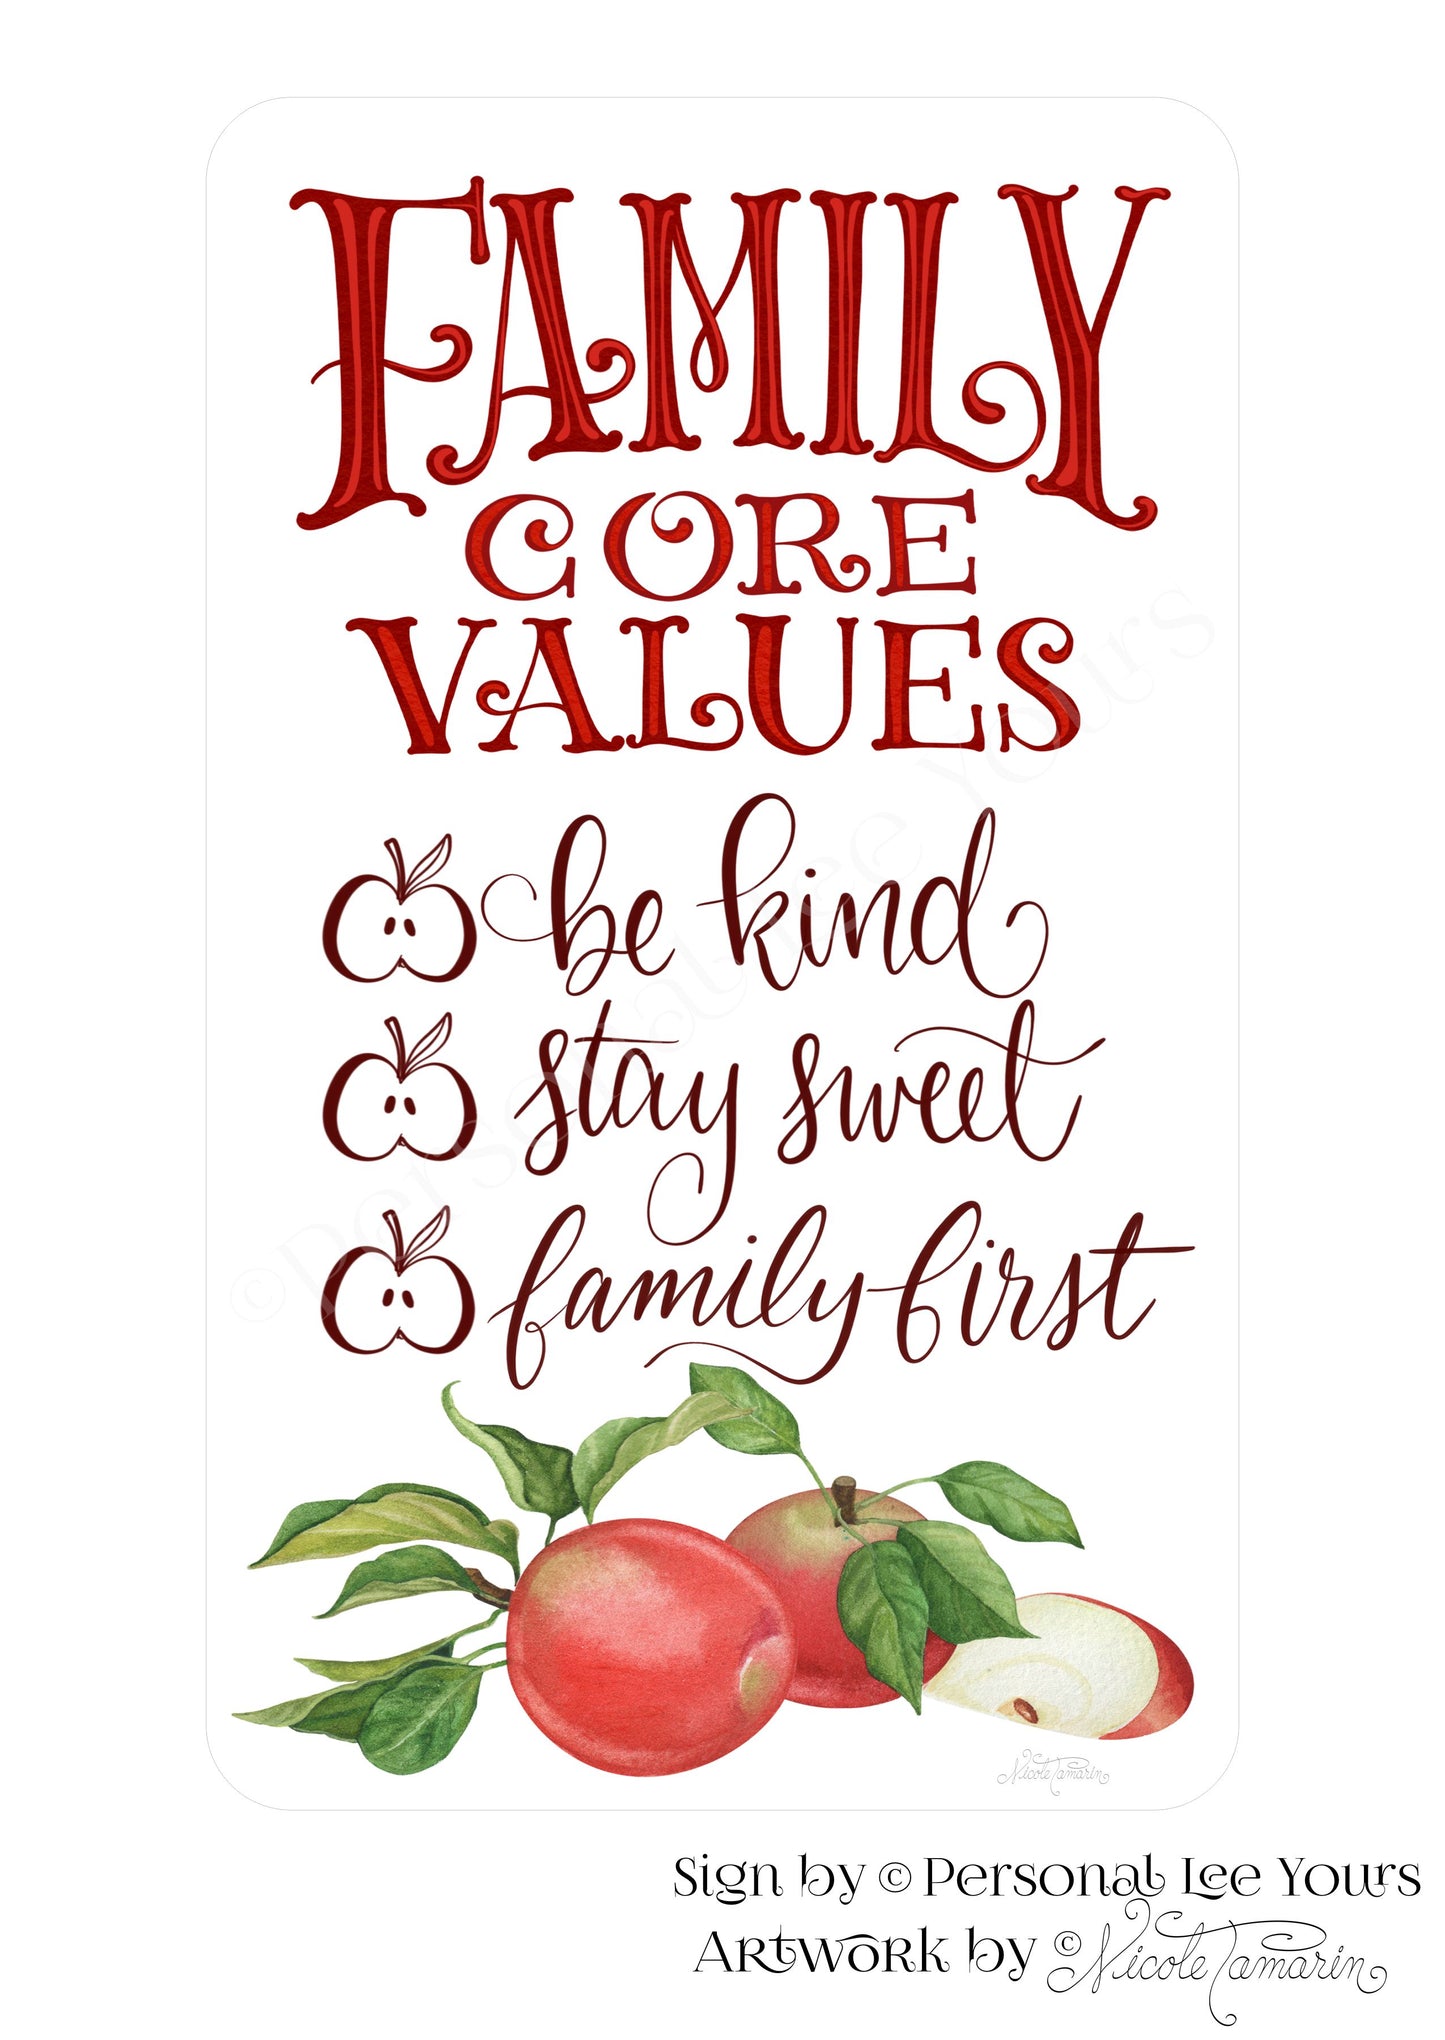 Nicole Tamarin Exclusive Sign * Family Core Values * 4 Sizes * Lightweight Metal